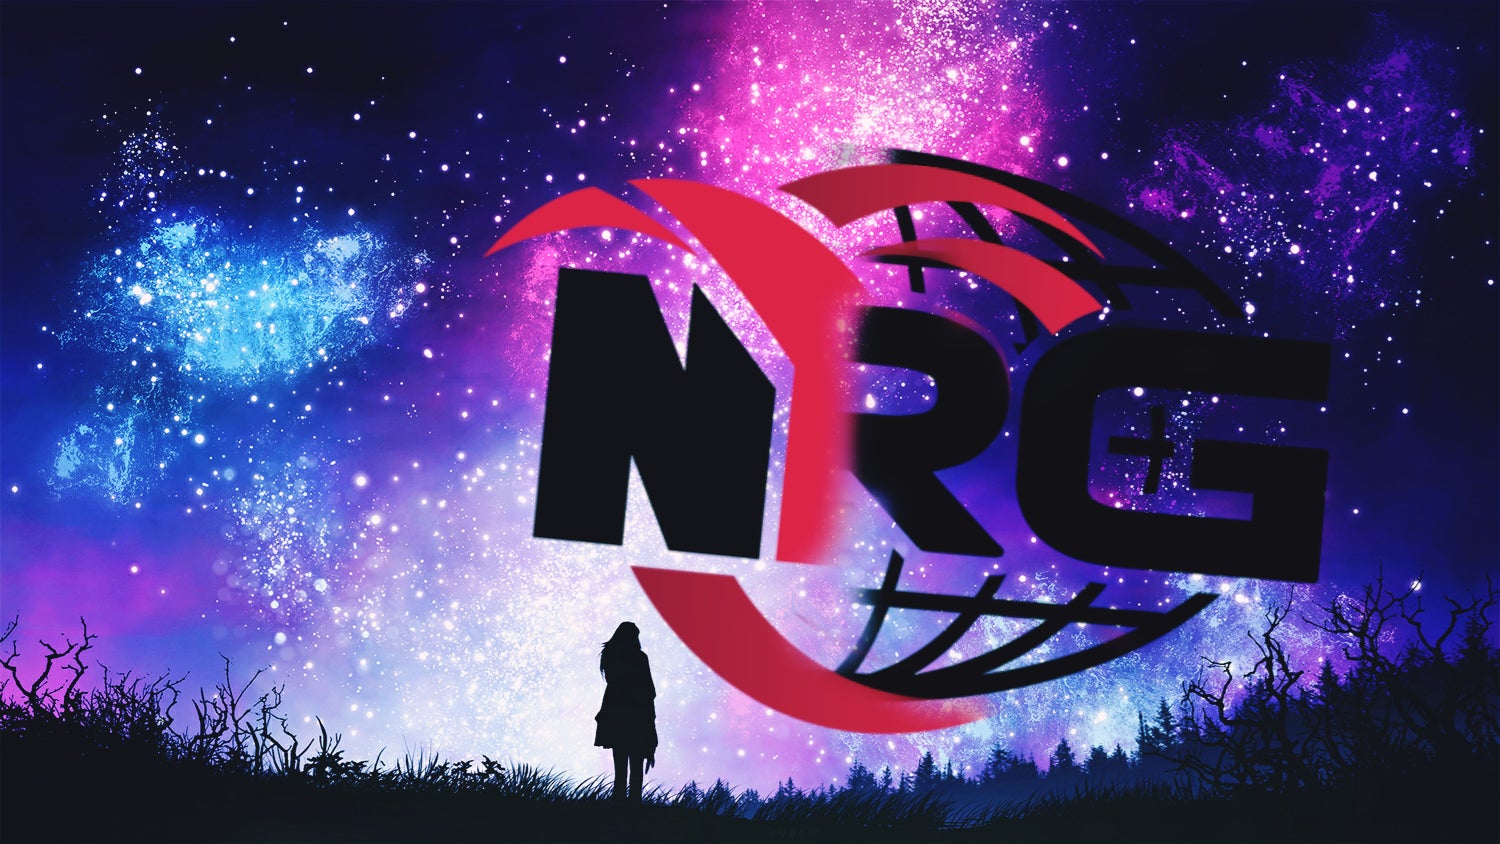 Been a long time fan of NRG, (Since season 3) so I made this NRG wallpaper that fuses both logos!